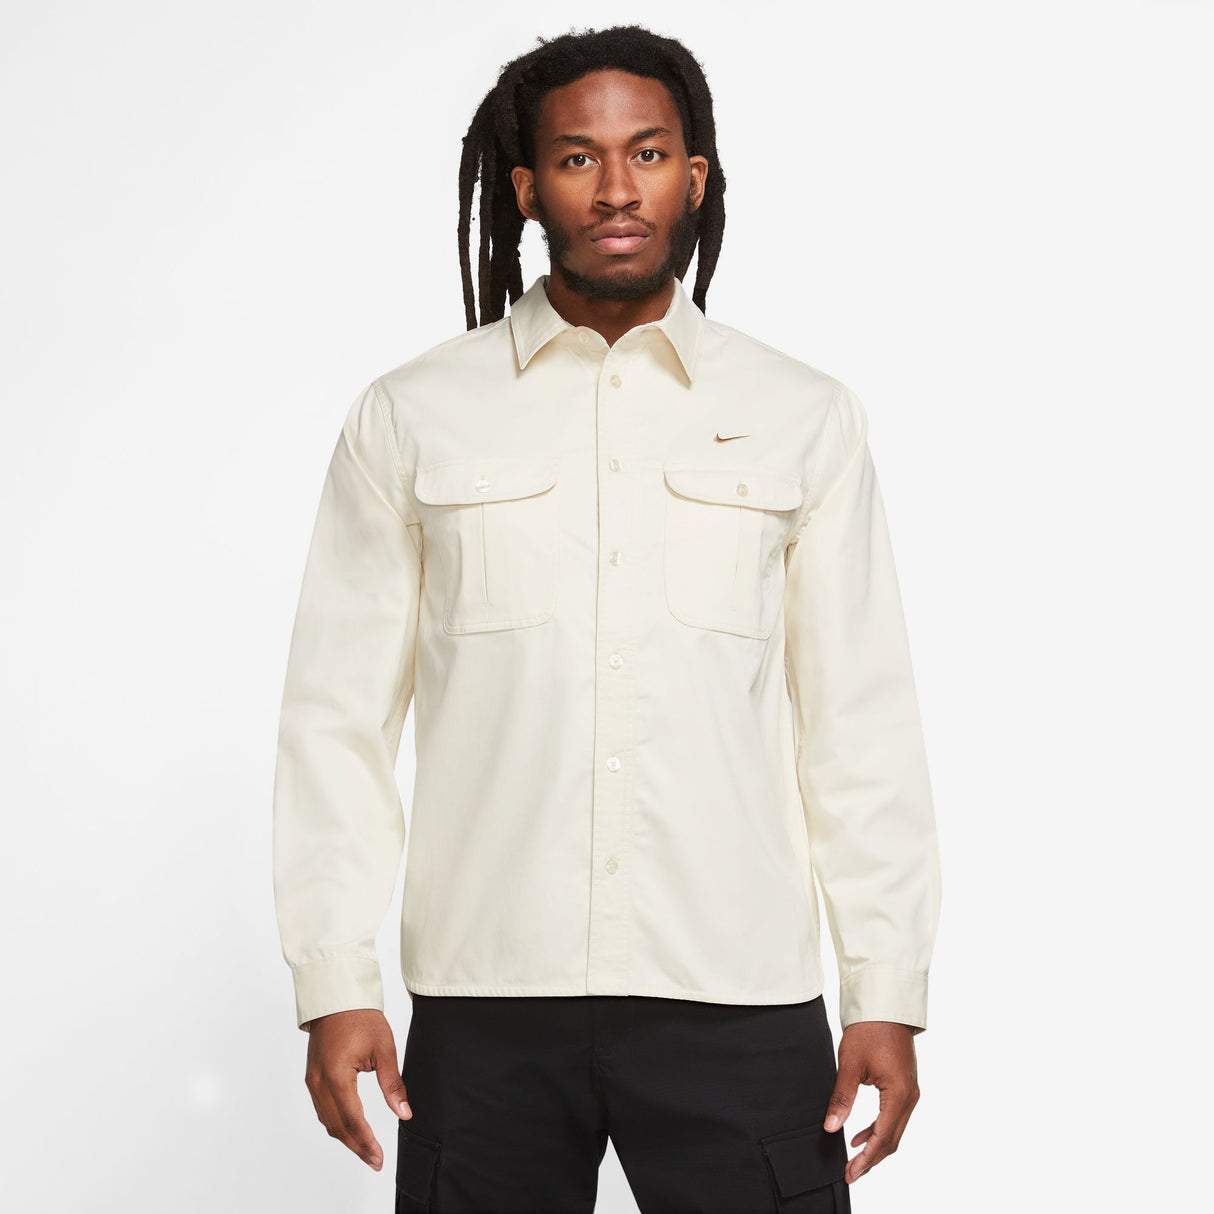 Nike SB Coconut Milk/Ale Brown Woven Skate Long-Sleeve Button Up Shirt